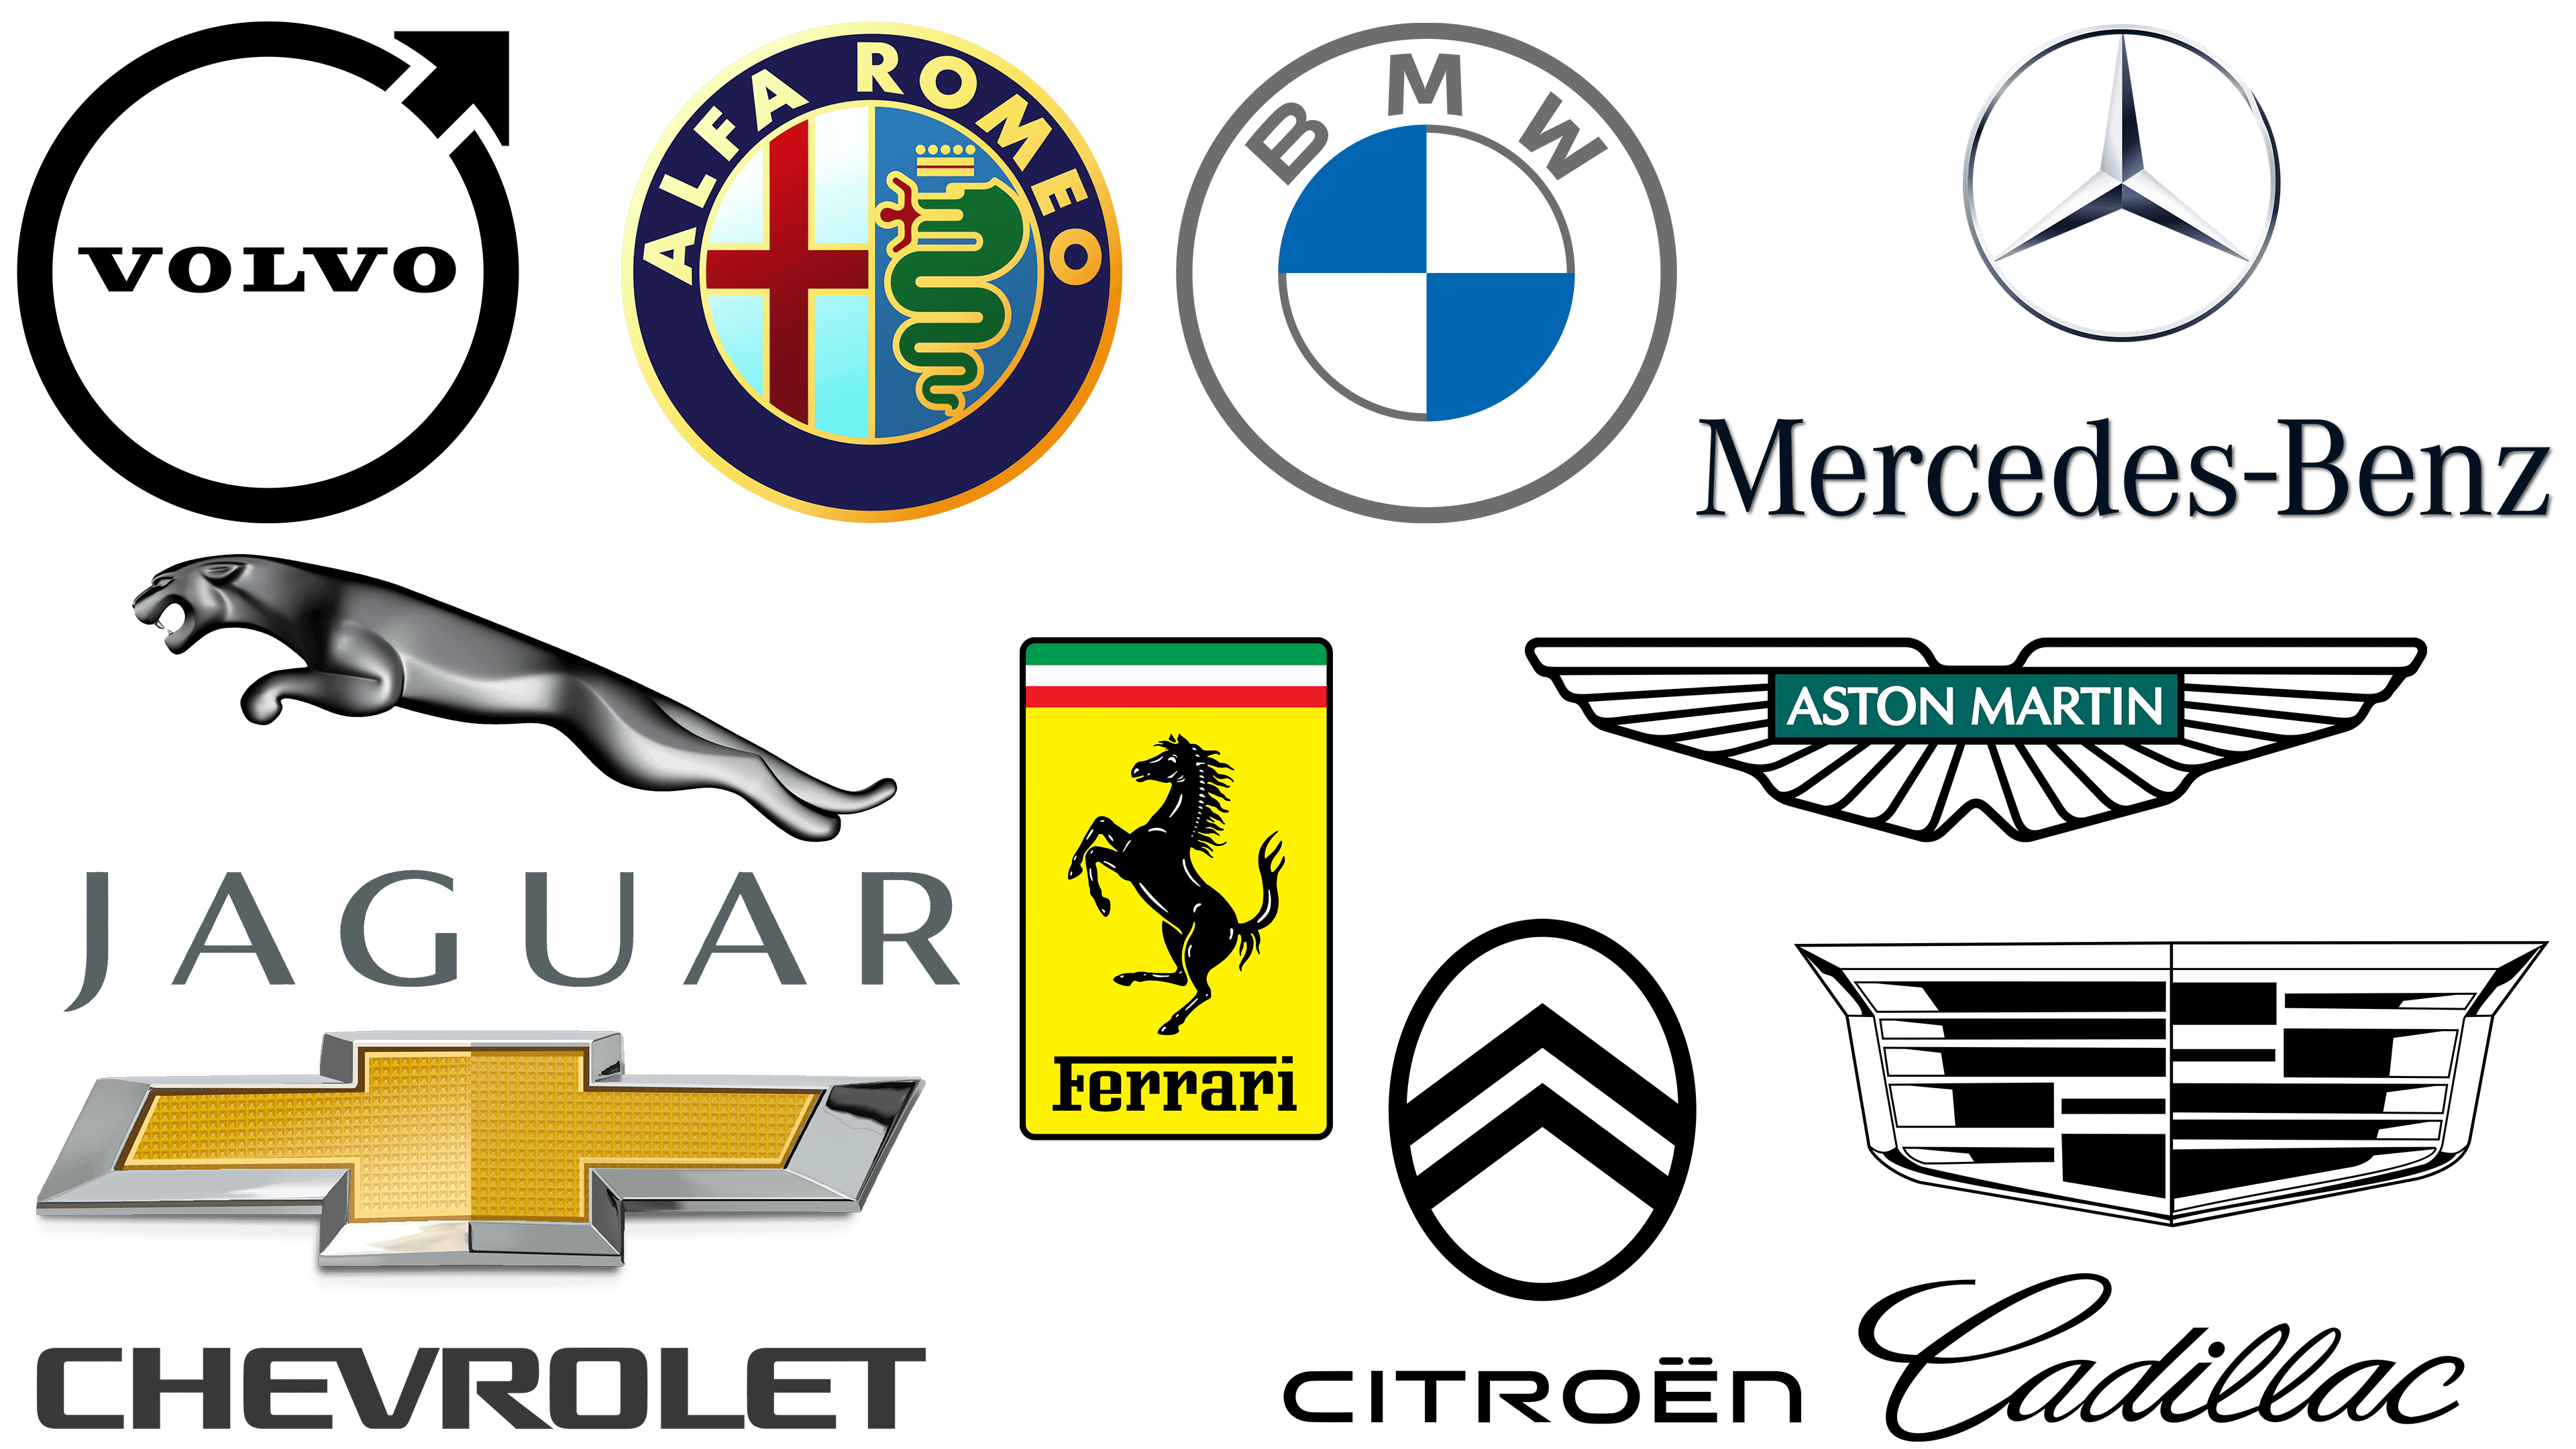 10 of the best car logos on the road today